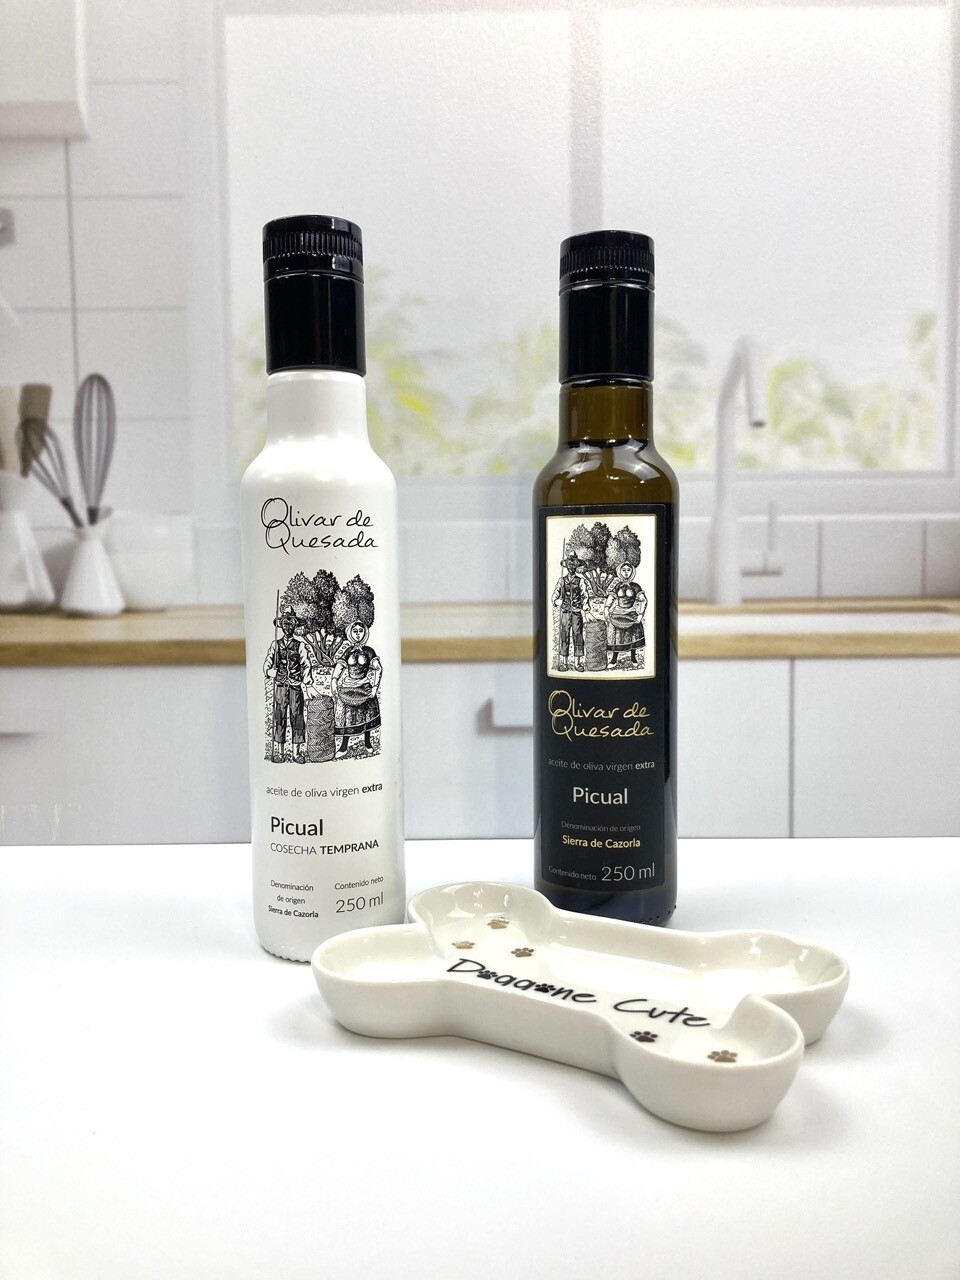 Olivar de Quesada: Picual Olive Oil (Duo Pack) from Spain (250 ml each one)